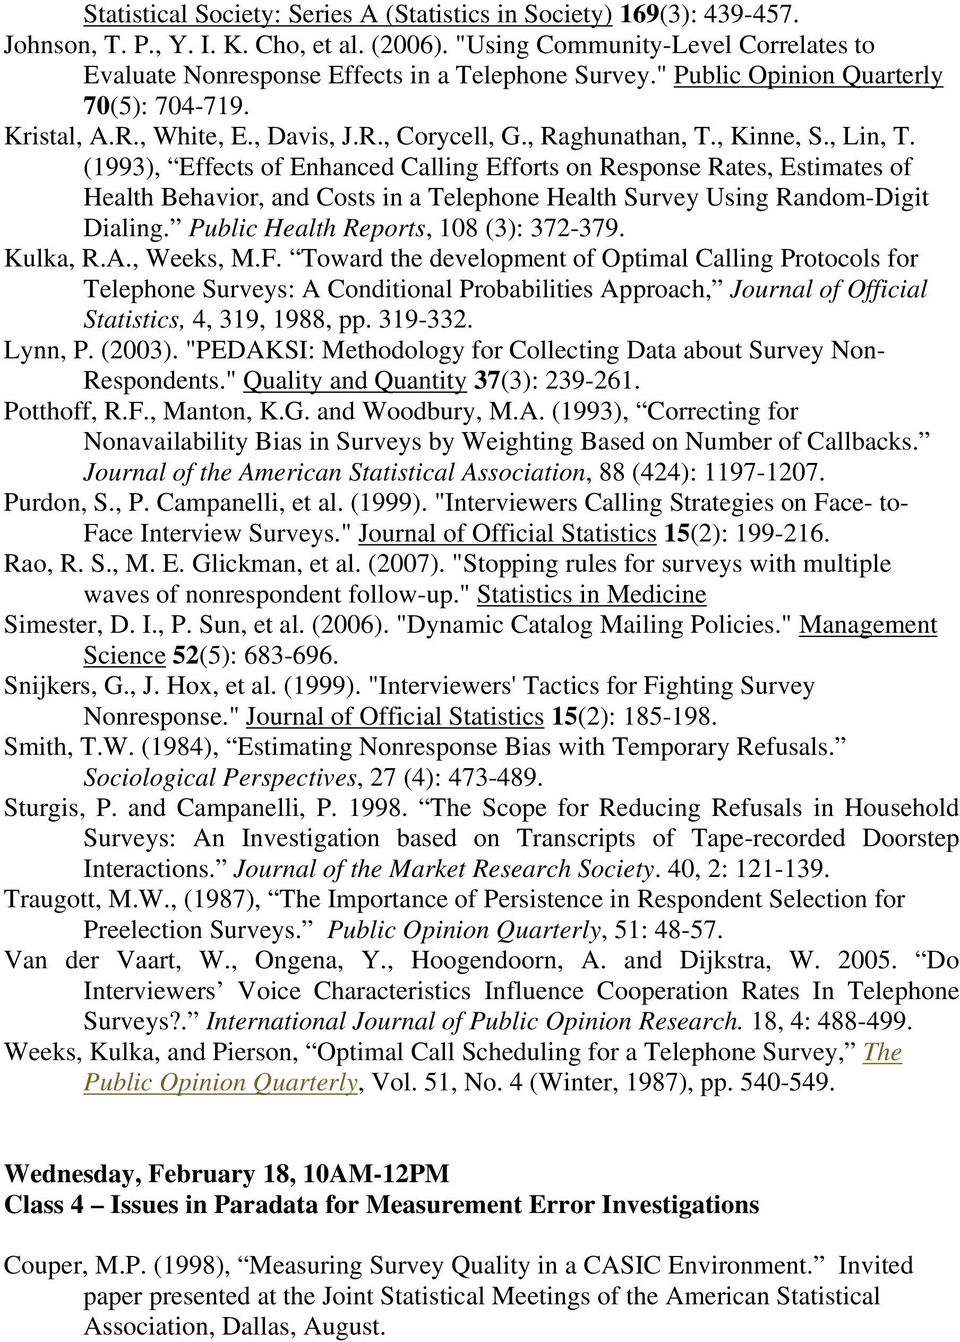 , Kinne, S., Lin, T. (1993), Effects of Enhanced Calling Efforts on Response Rates, Estimates of Health Behavior, and Costs in a Telephone Health Survey Using Random-Digit Dialing.